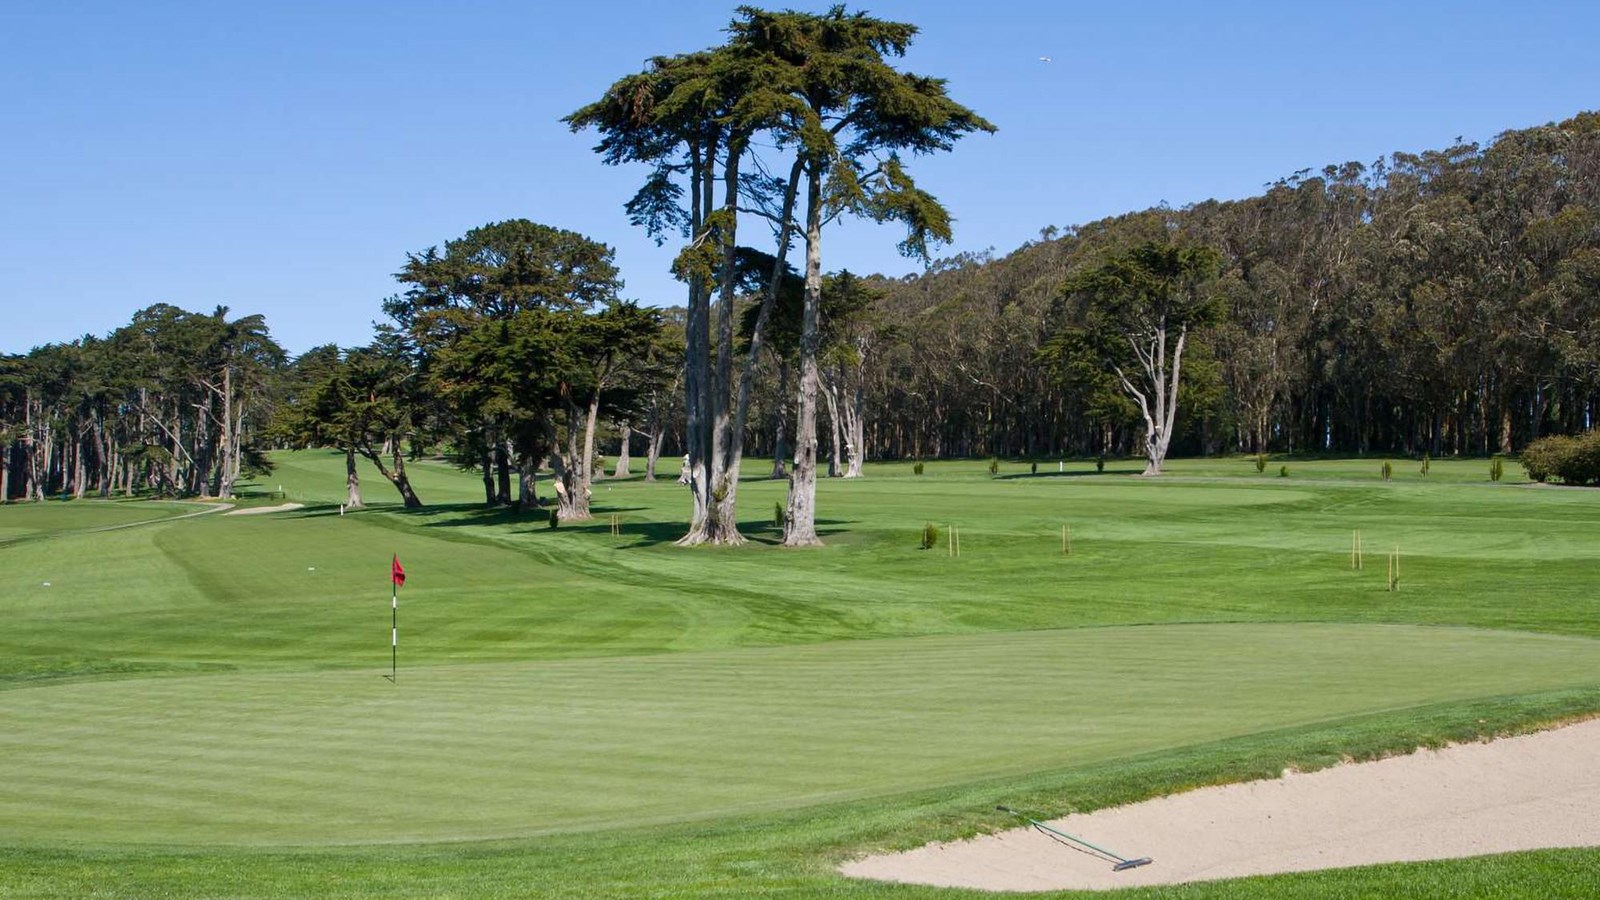 A view across the green links with sand trap in foreground and Monterey cypress behind.